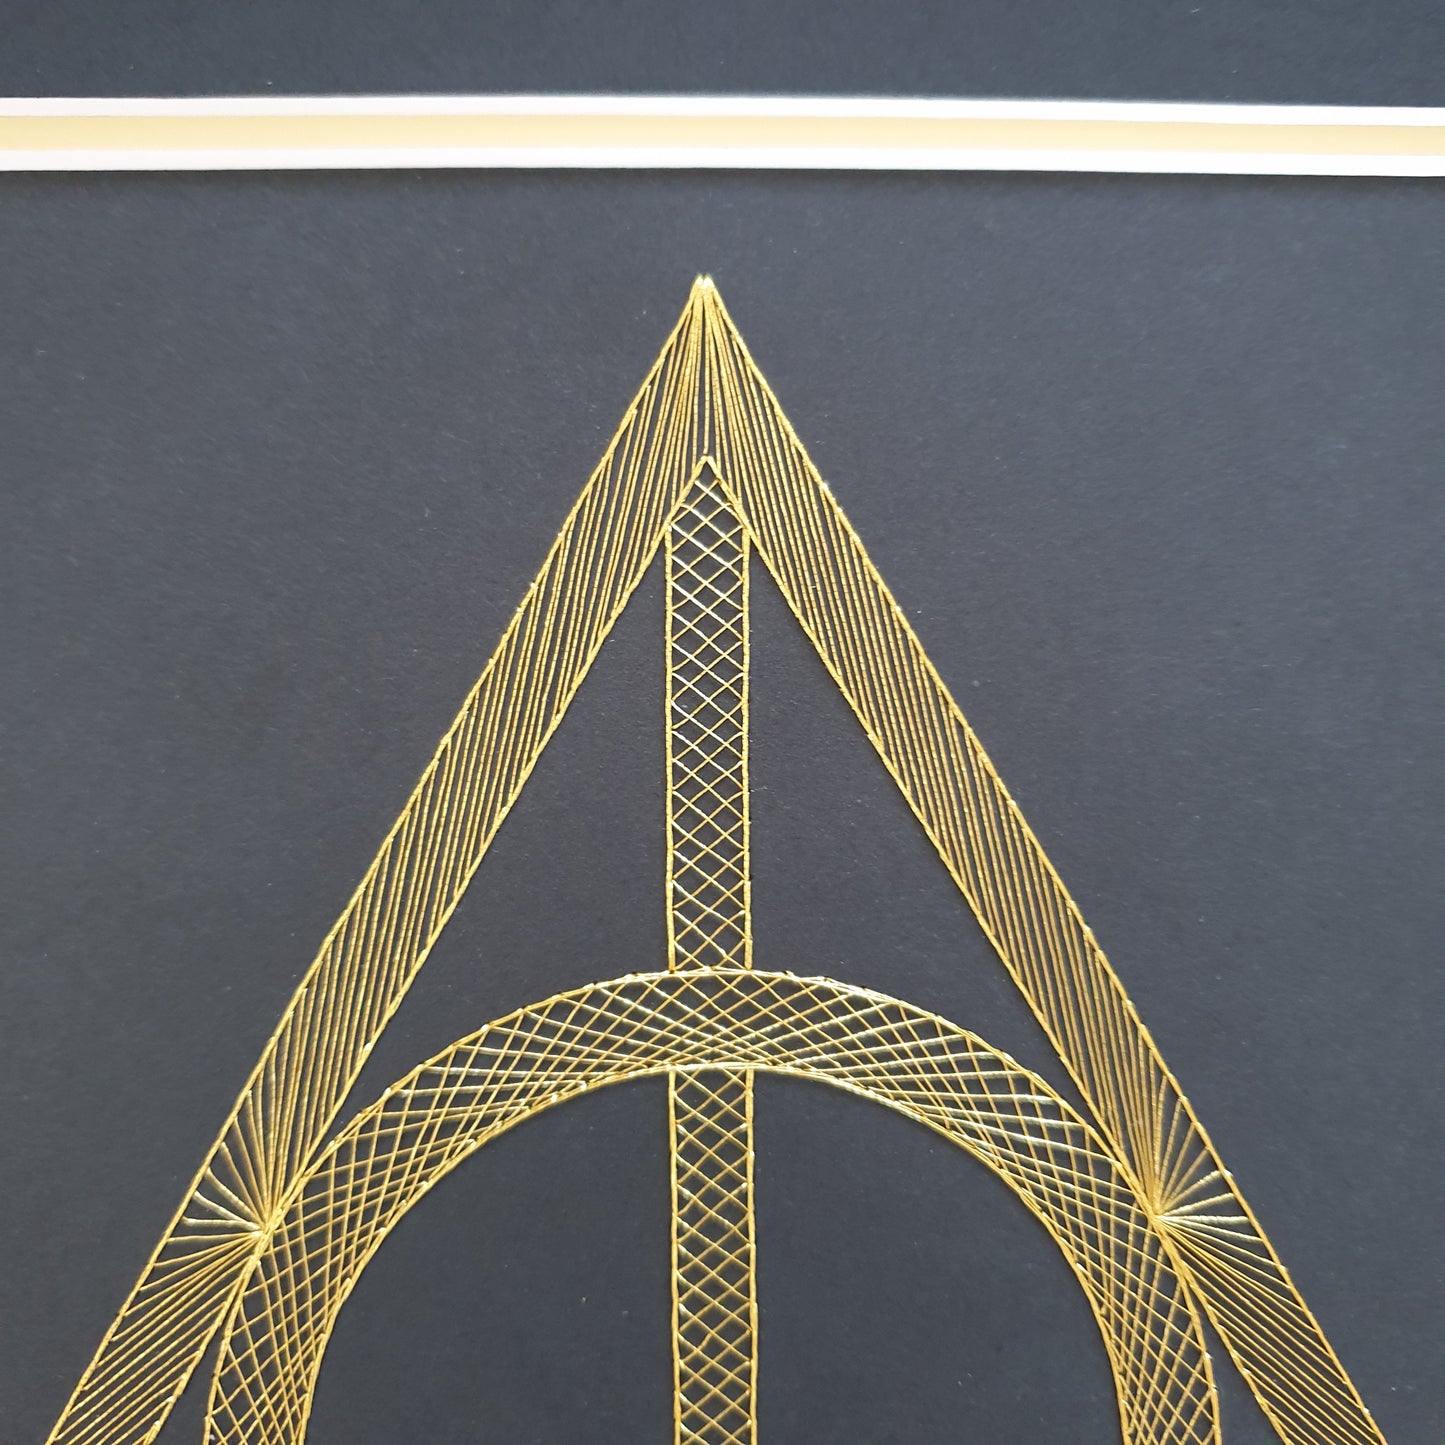 Harry Potter Deathly Hallows Inspired Card Embroidery Kit (Black Card)